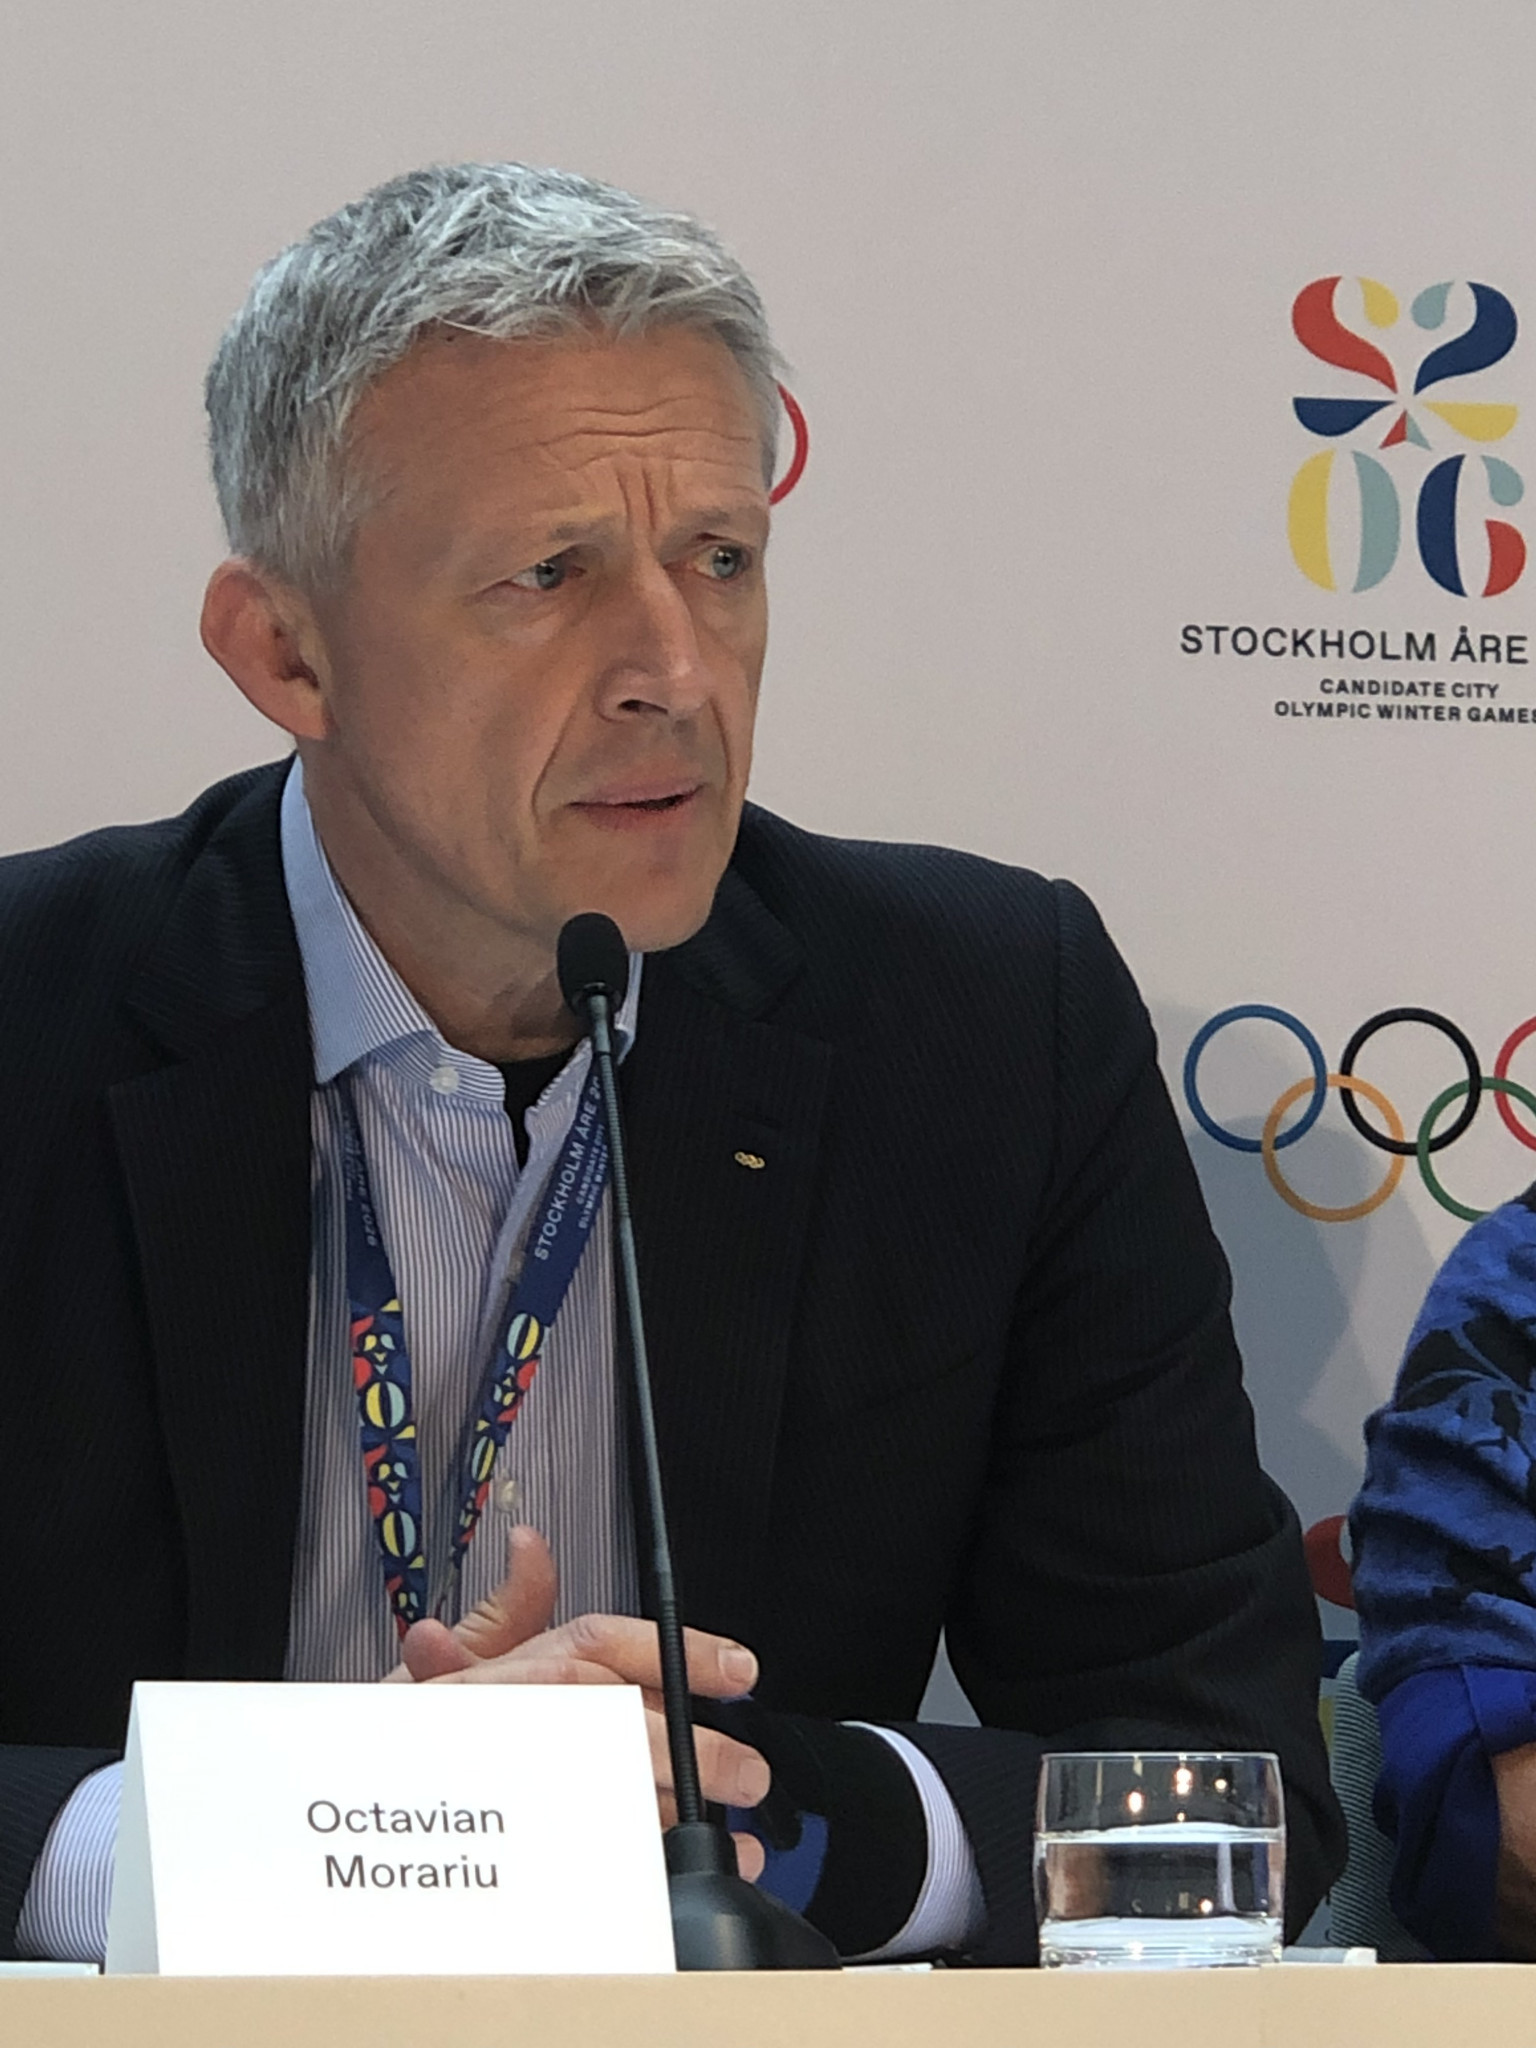 IOC Evaluation Commission chair Octavian Morariu admitted there remained doubt over the Government guarantees but was otherwise about upbeat about the Stockholm Åre 2026 bid ©ITG